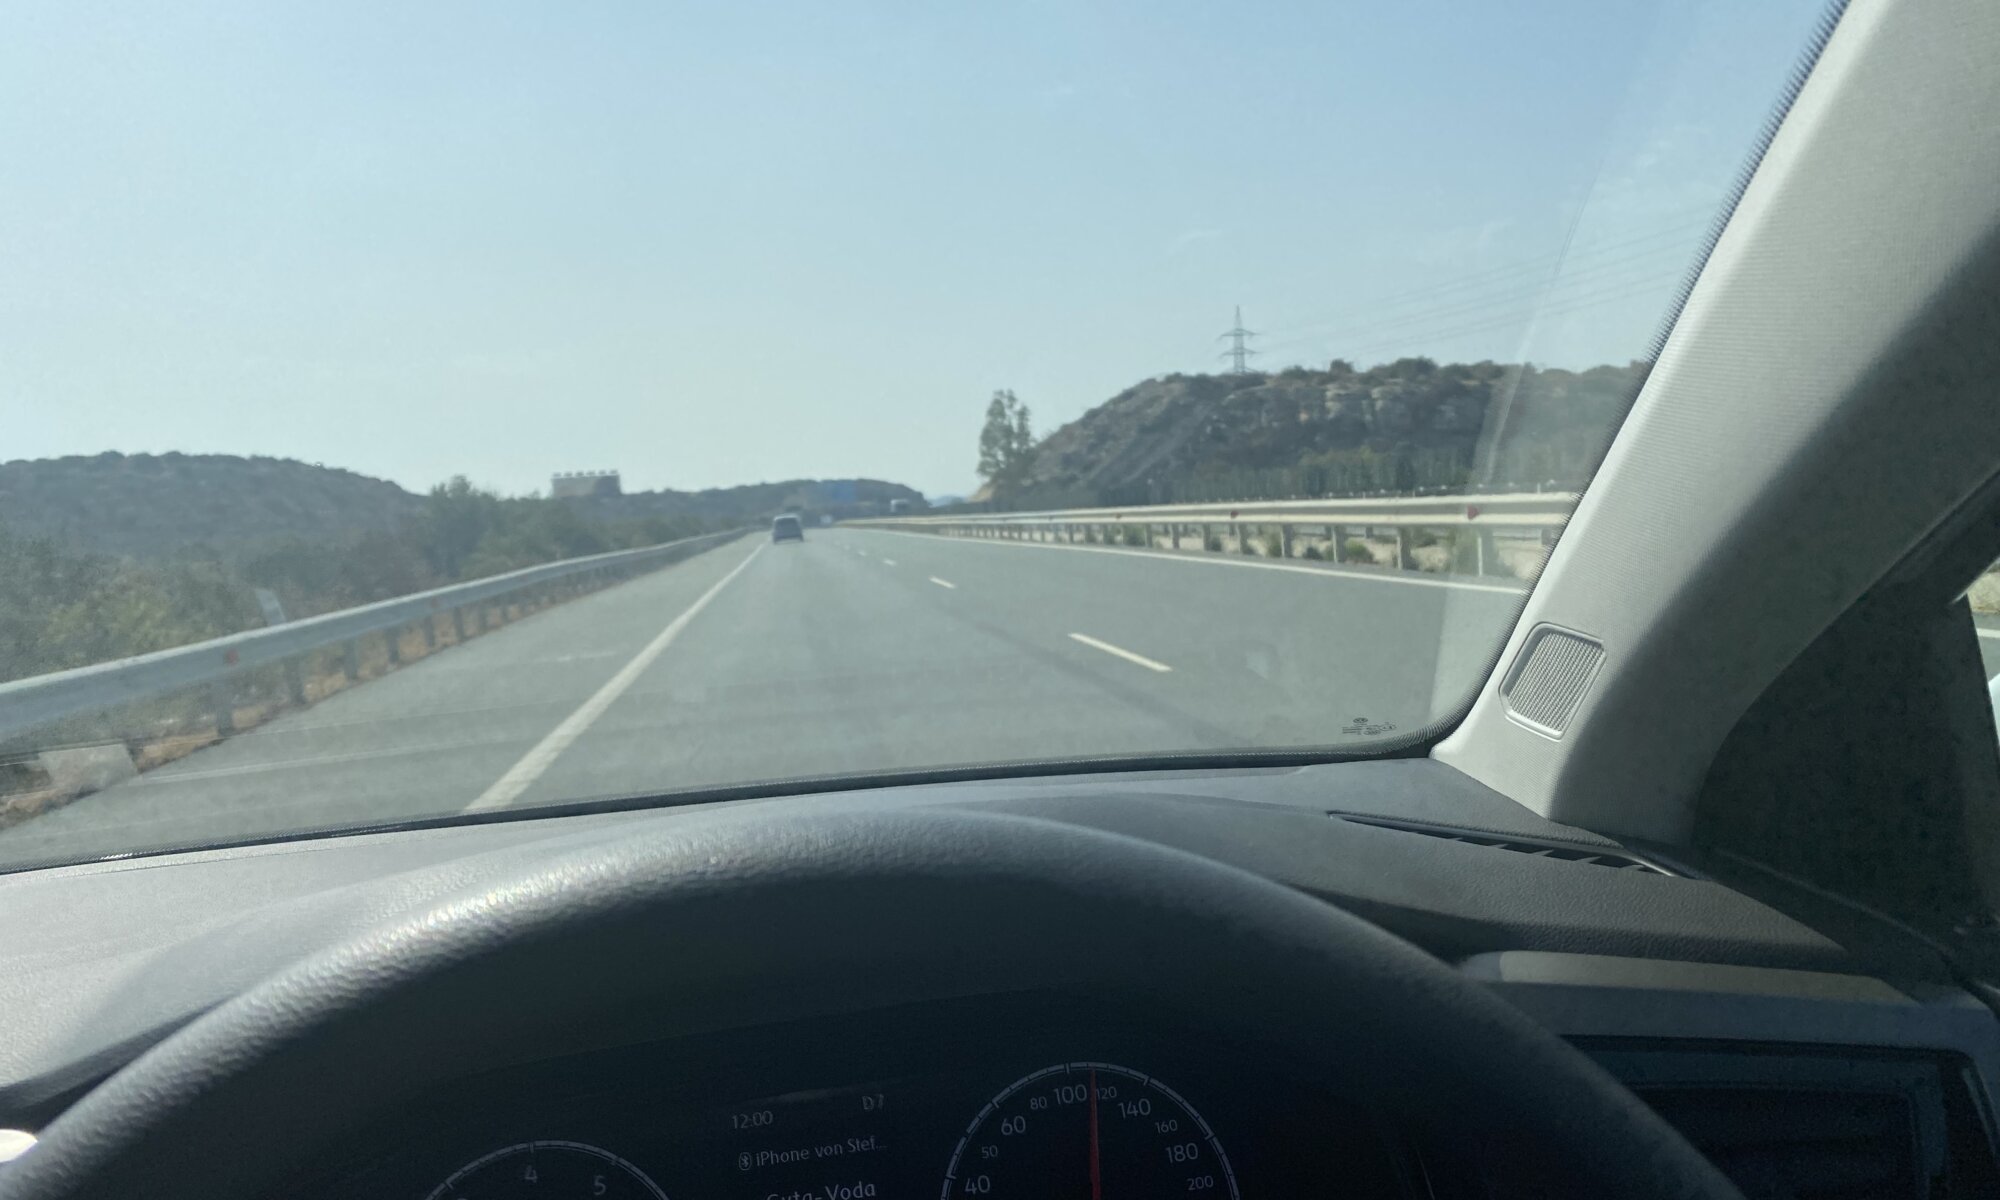 Driving on the left, Κύπρος